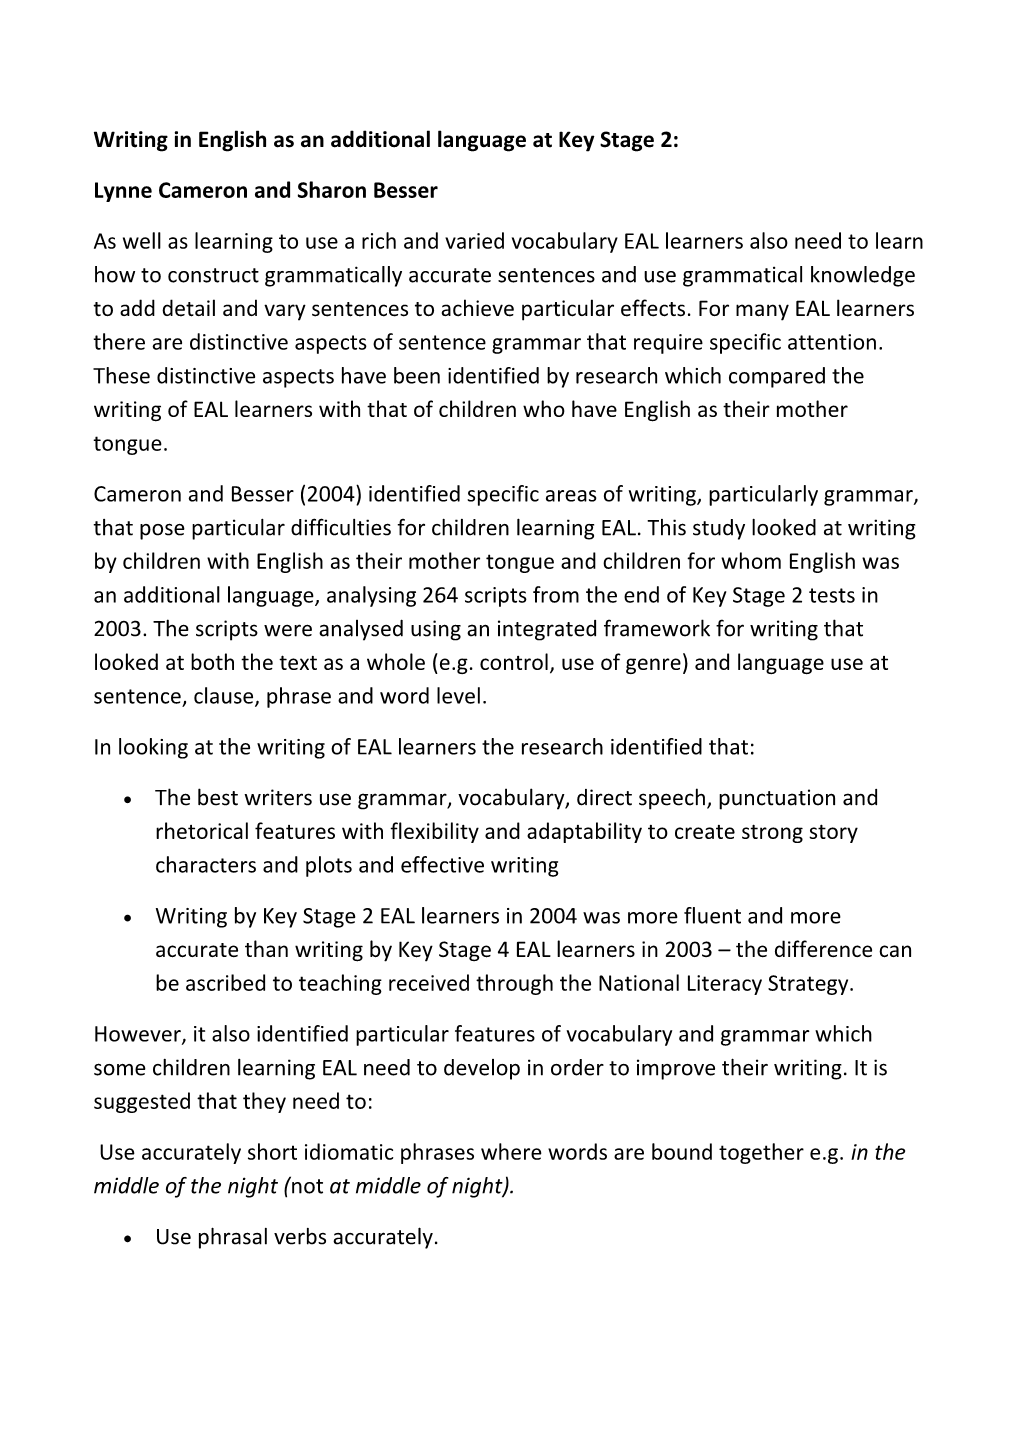 Writing in English As an Additional Language at Key Stage 2